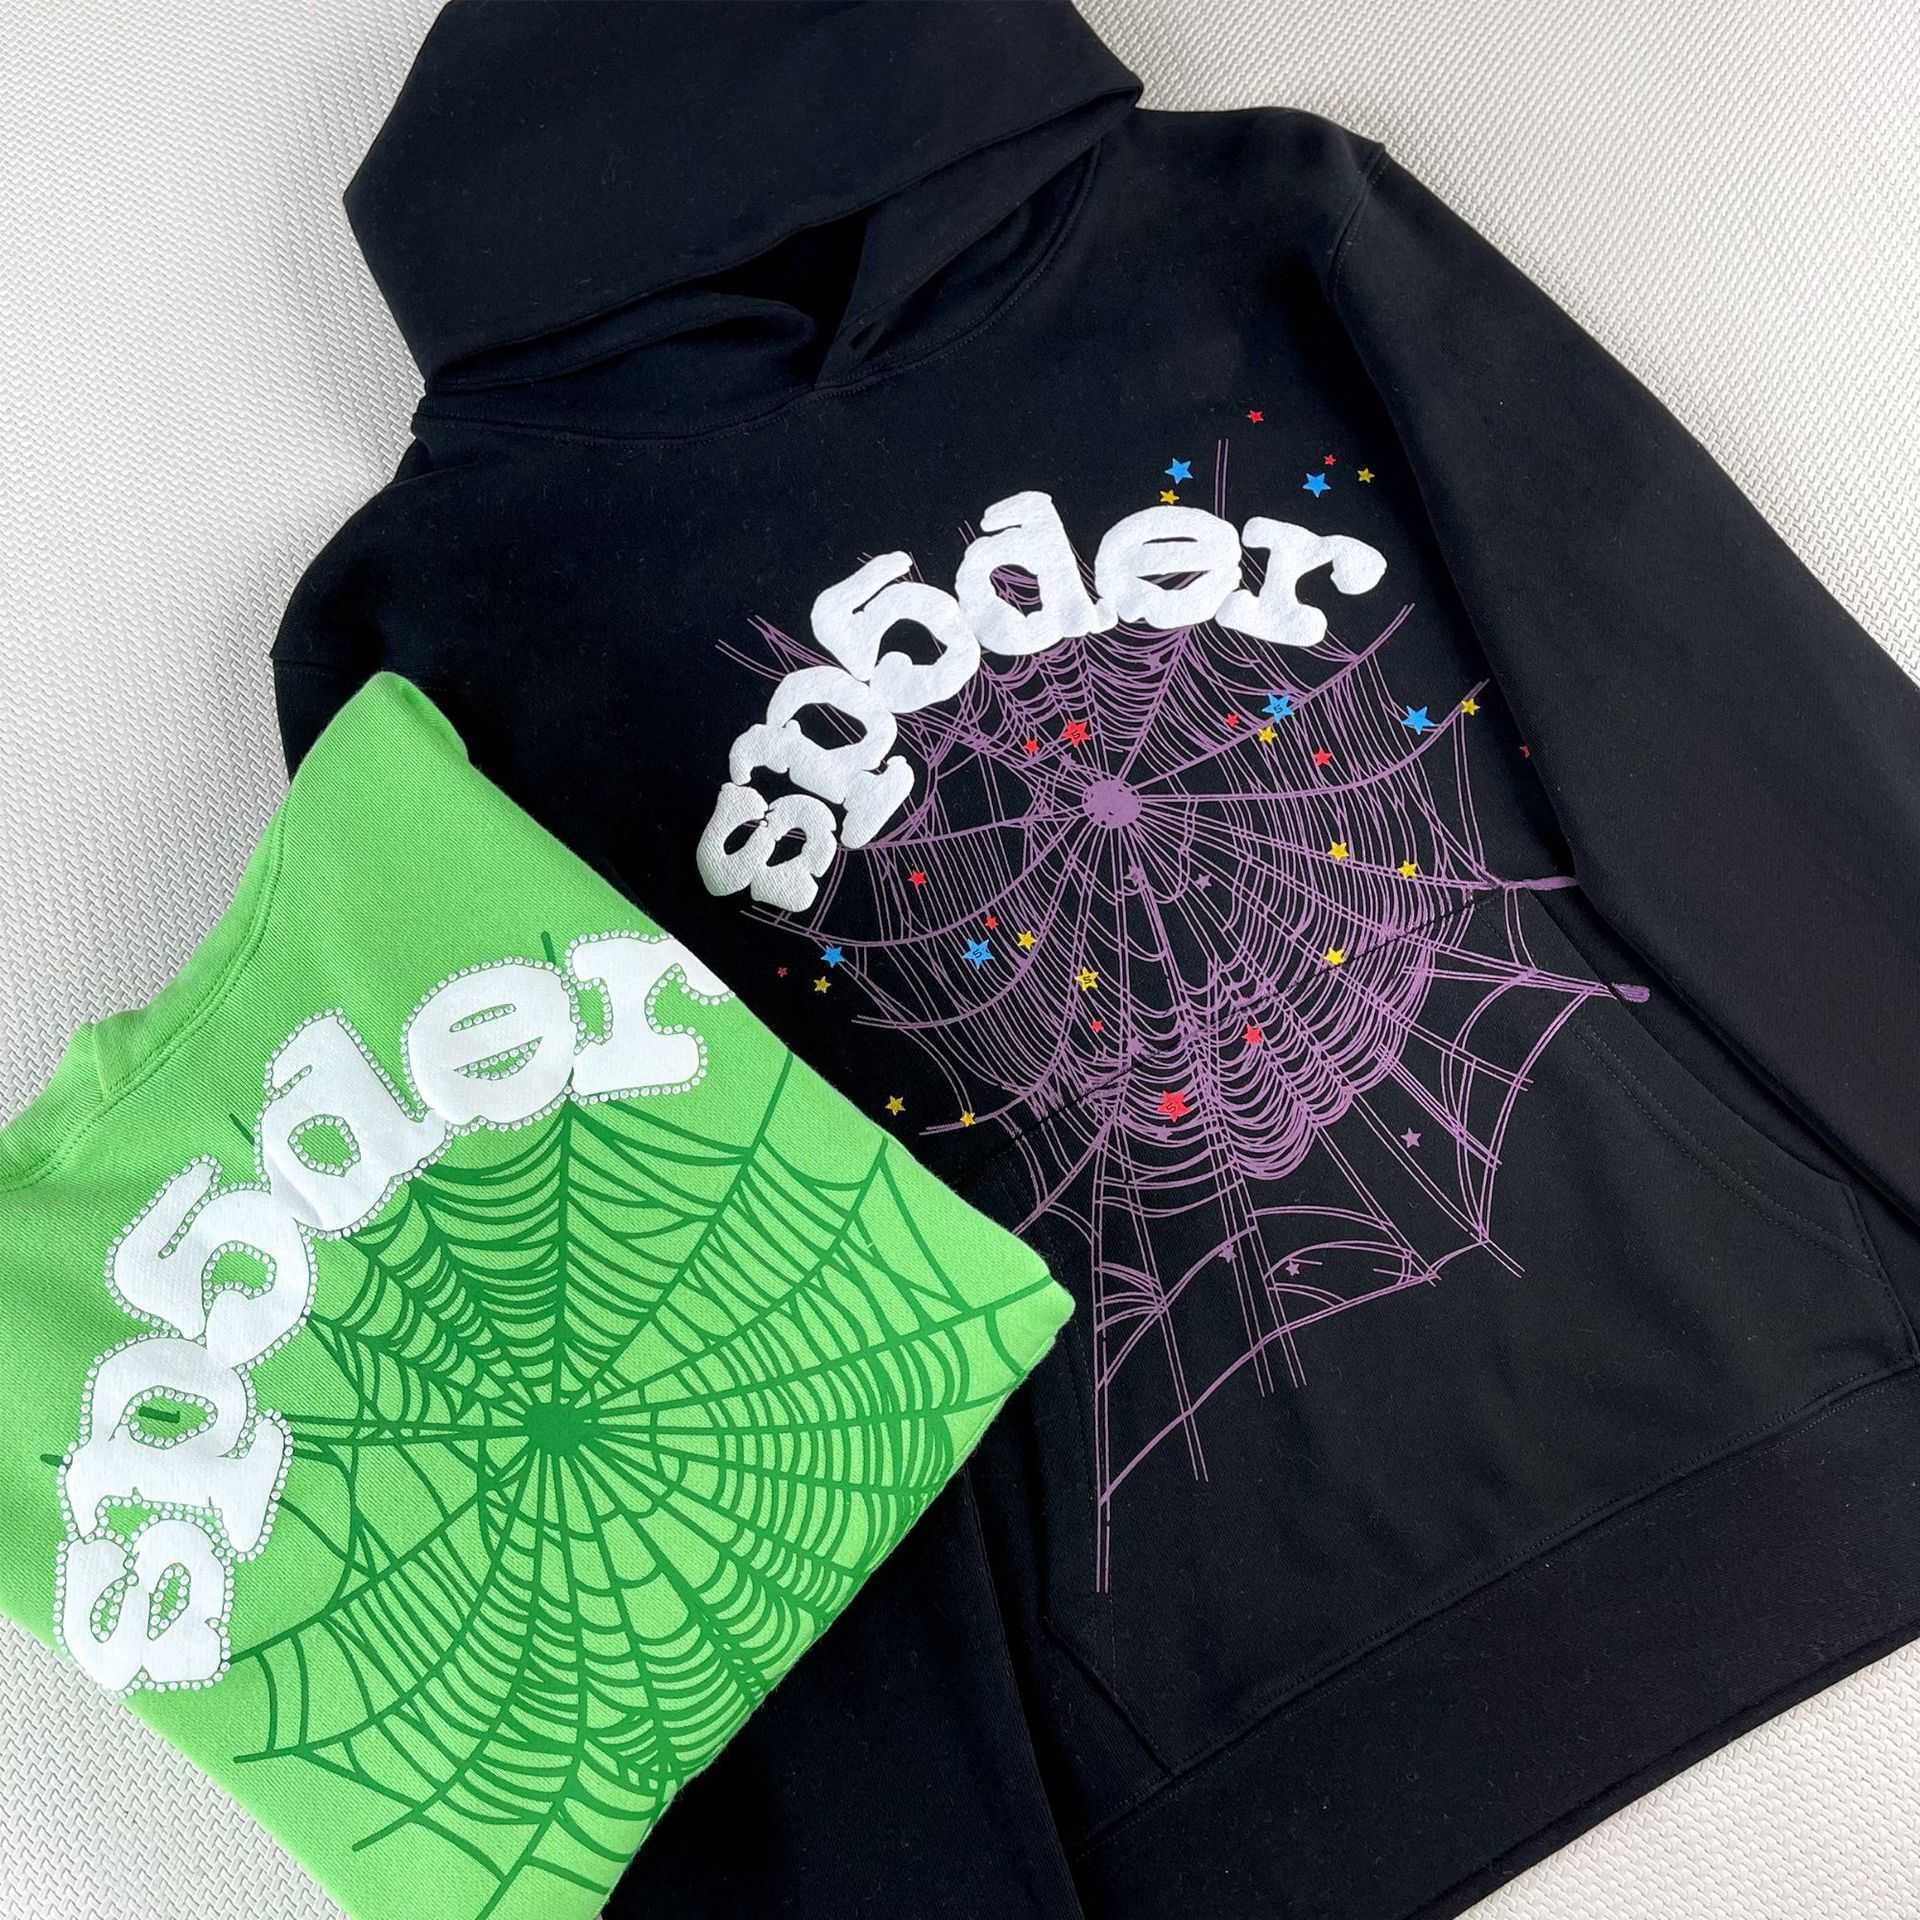 What do consumers have to say about the Sp5der hoodie?